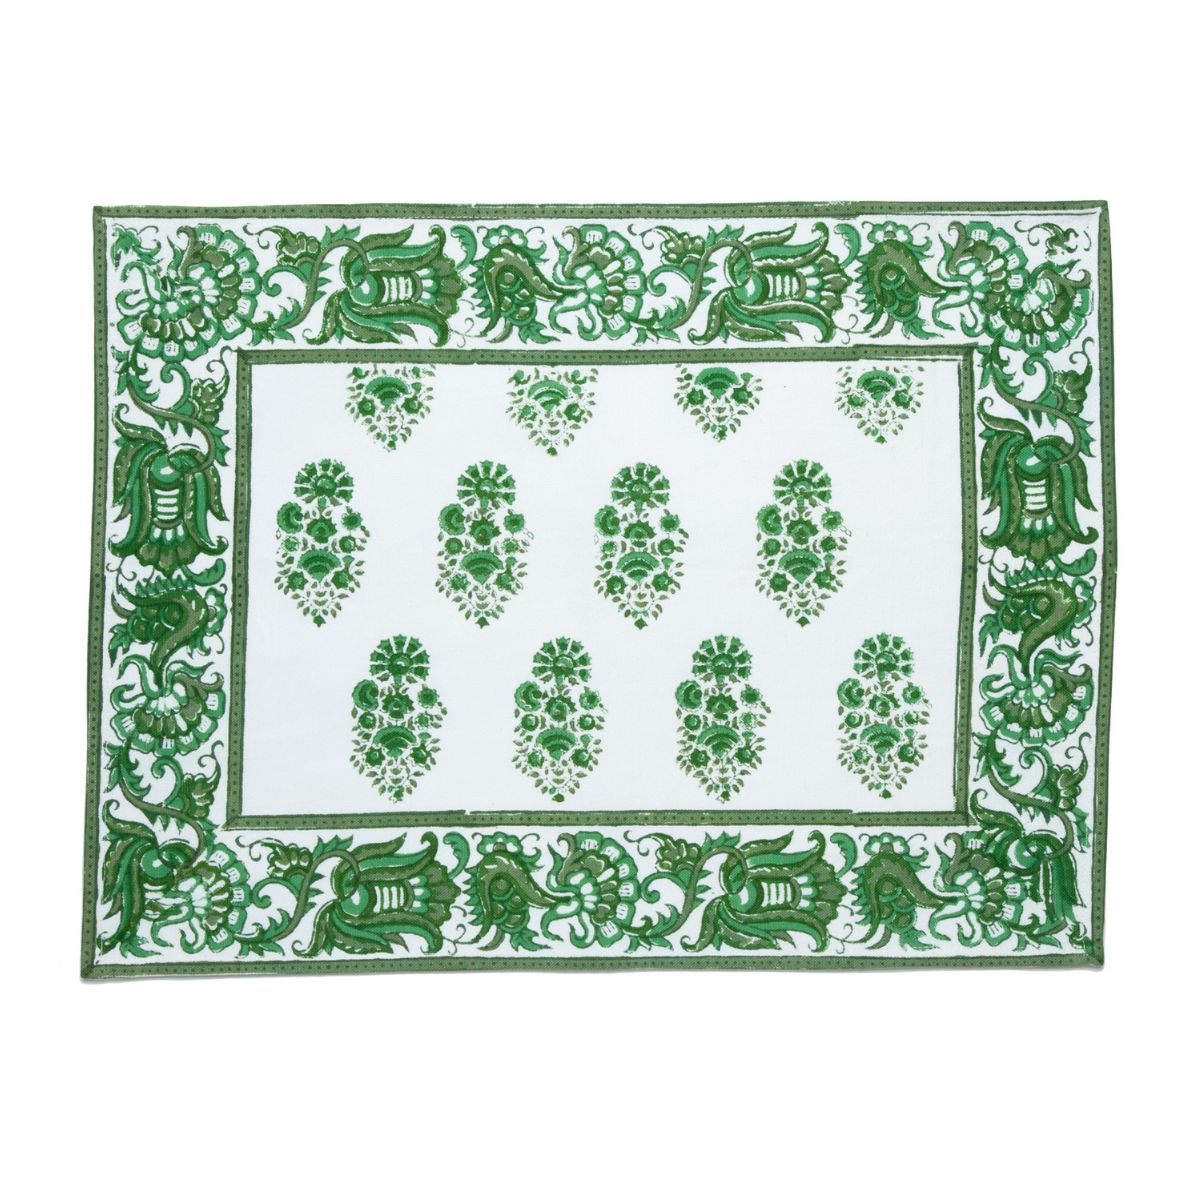 Marigold Living Green and White Cotton Placemat, Set of 6